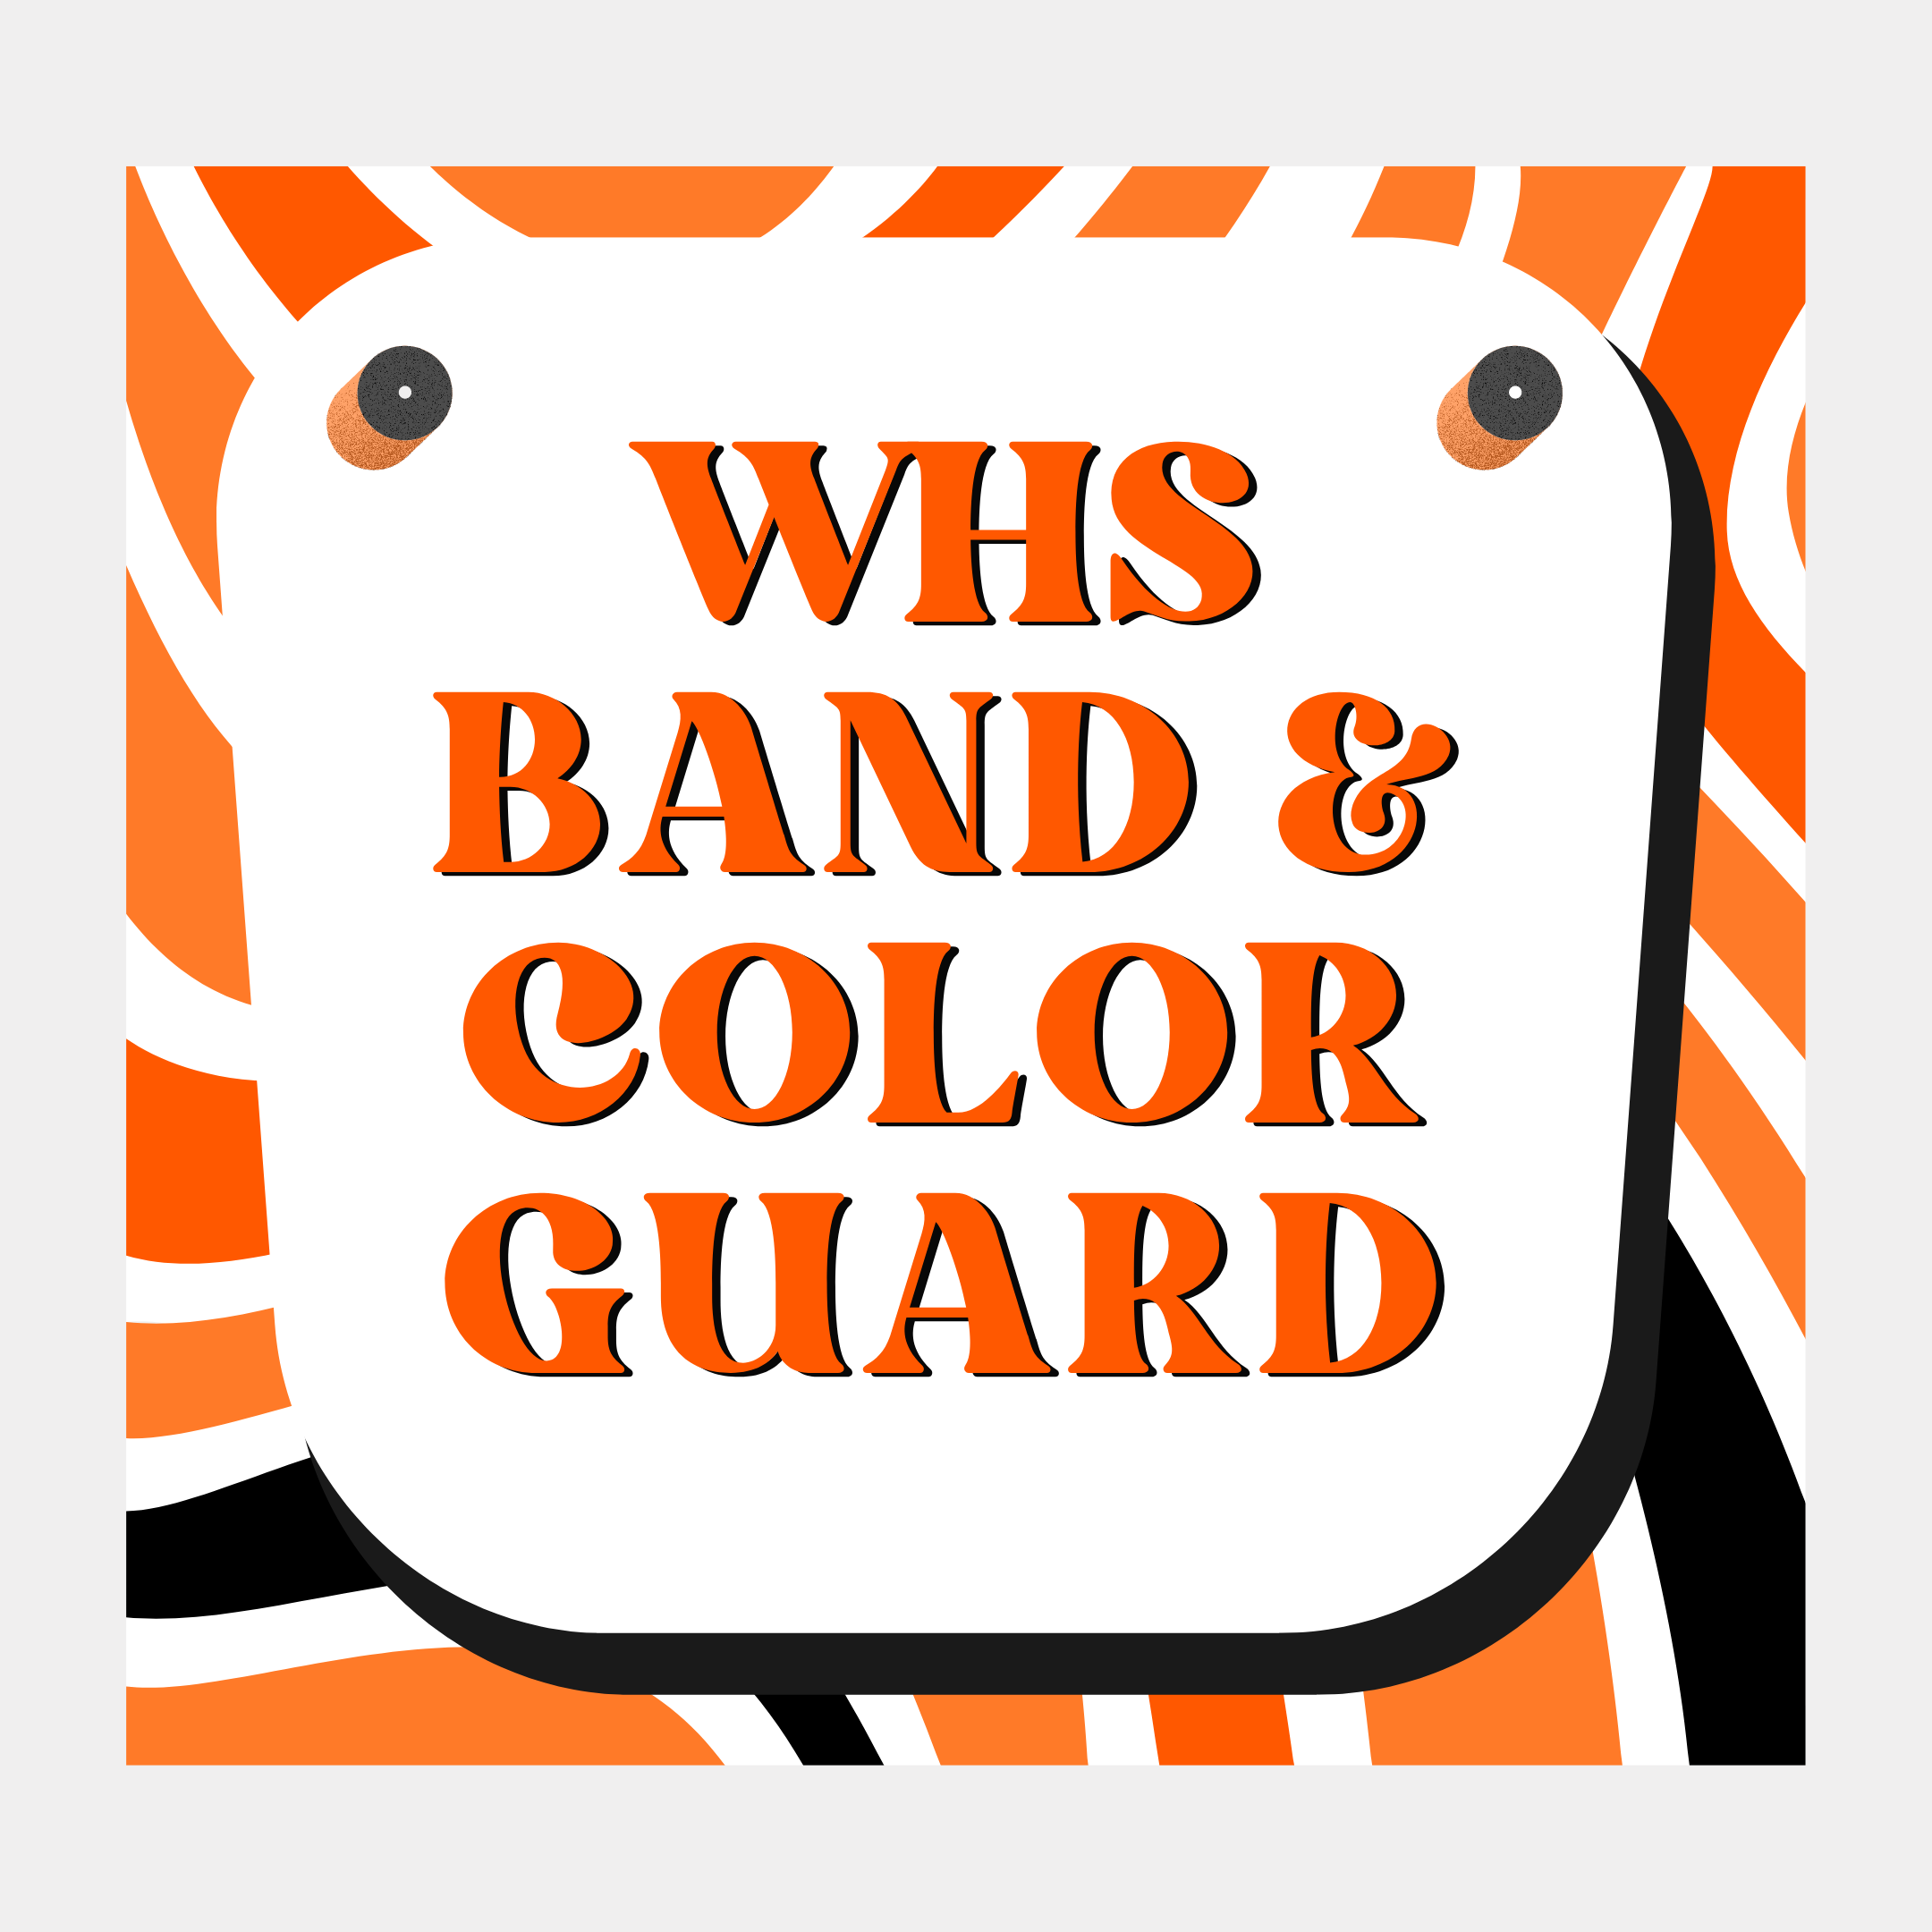 WHS band and colorguard